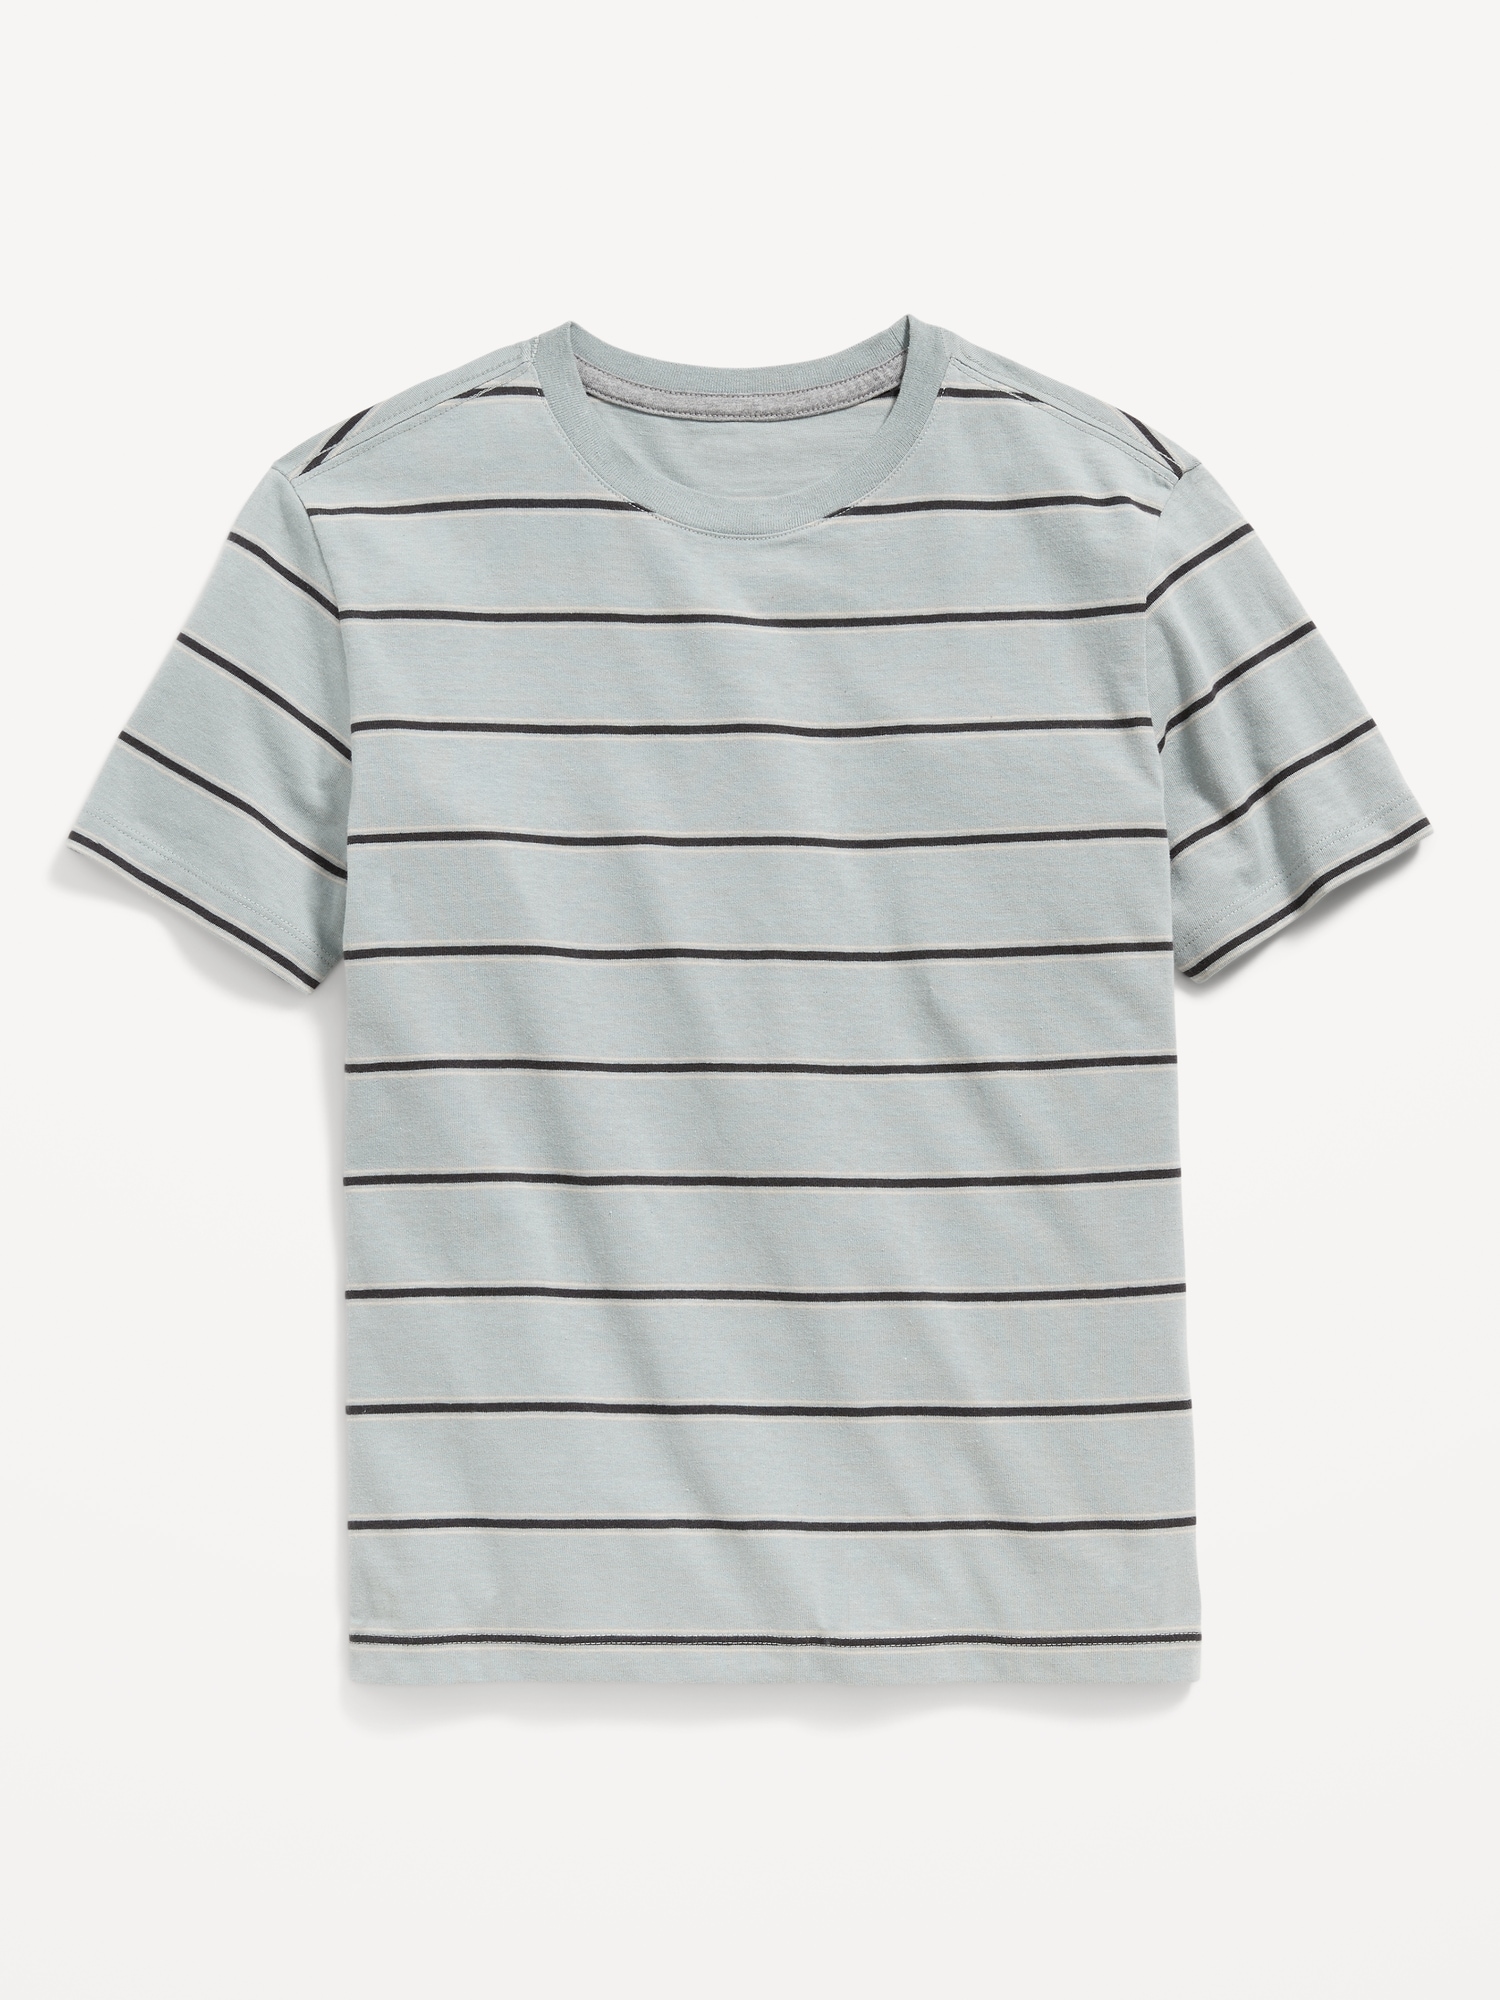 Old Navy Softest Short-Sleeve Striped T-Shirt for Boys silver. 1